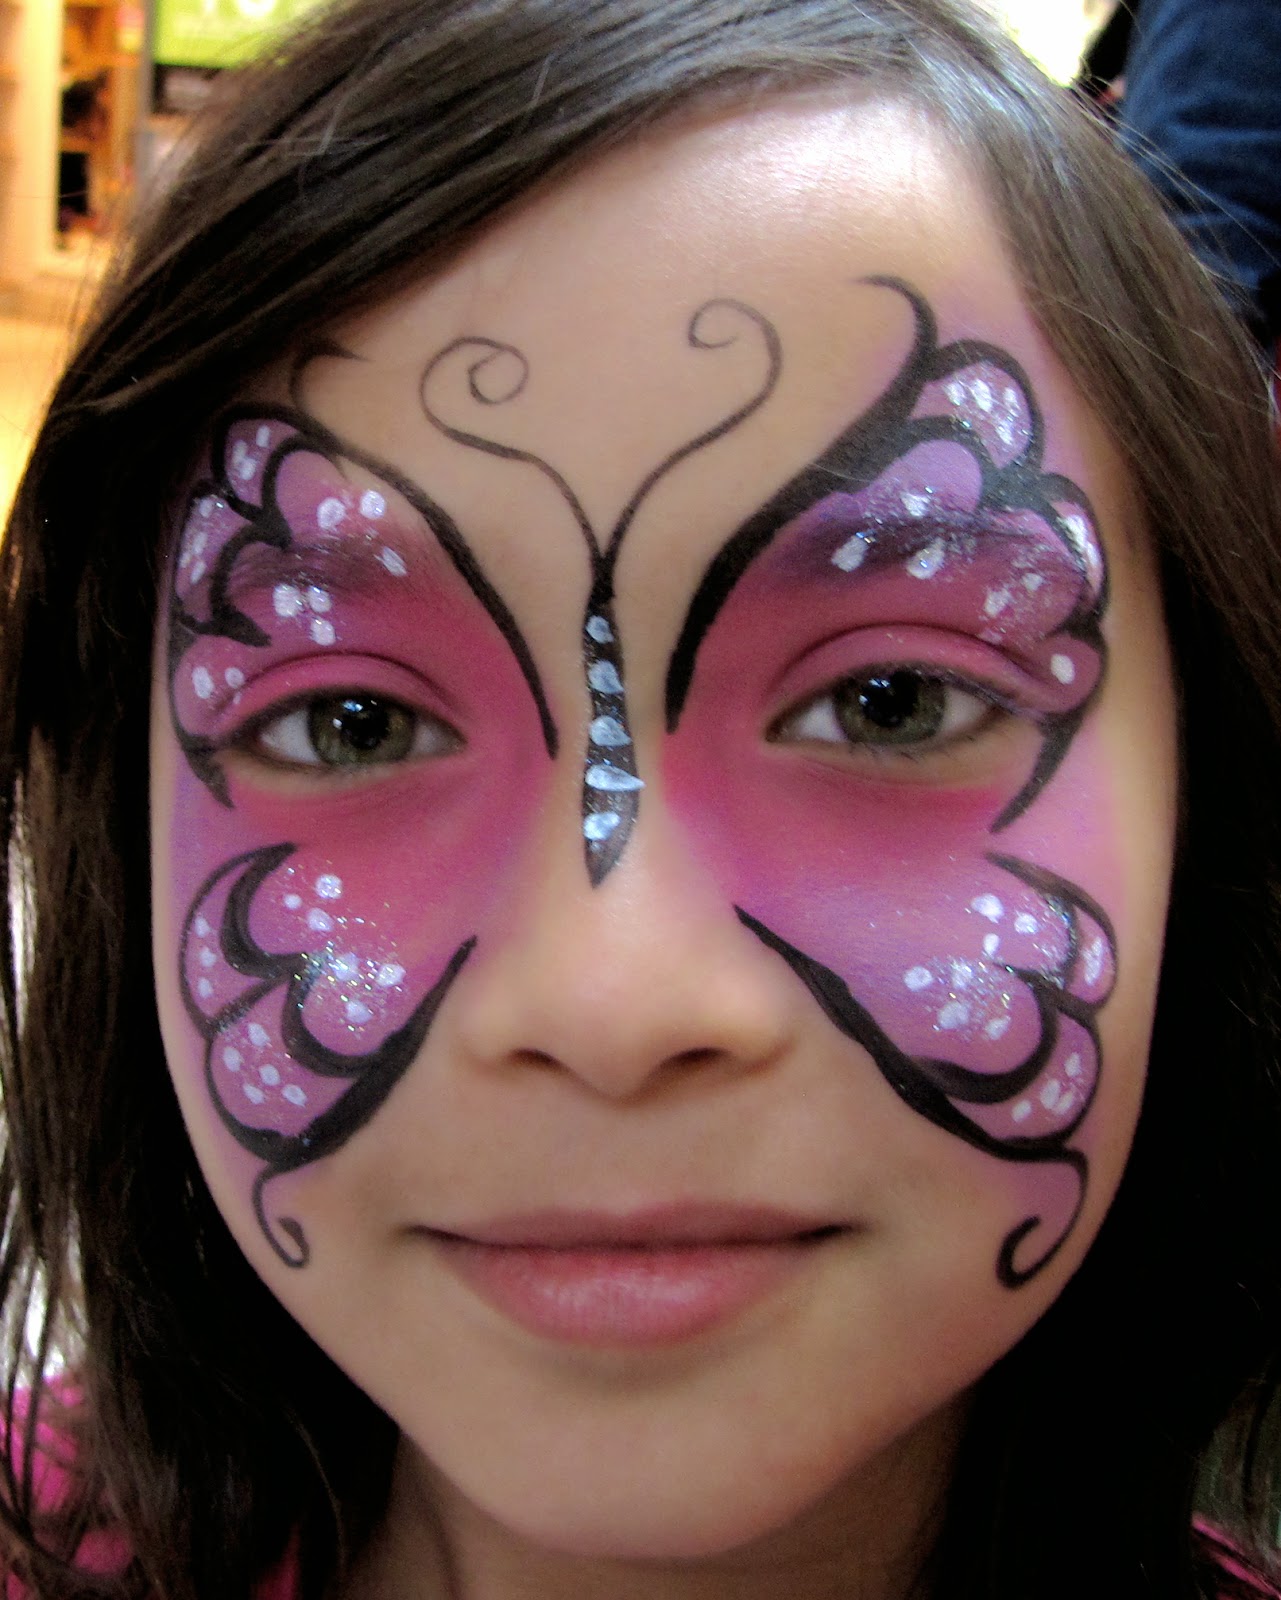 Life, Art, and Face Paint: 4 Reasons Why I Don't Use Snazaroo